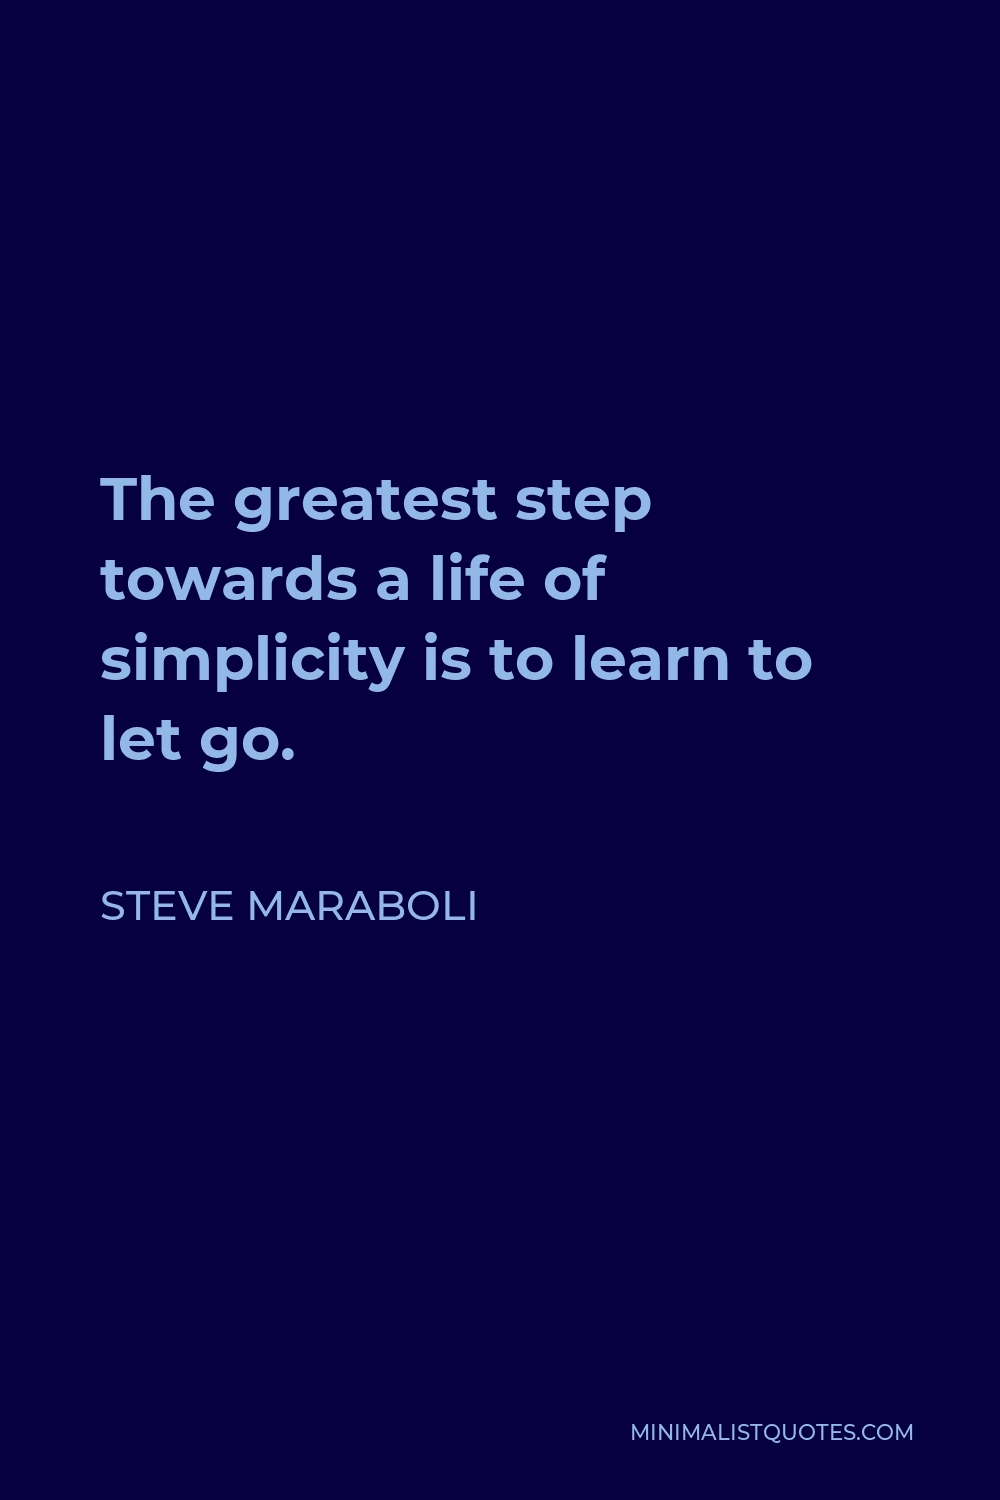 Steve Maraboli Quote - The greatest step towards a life of simplicity is to learn to let go.